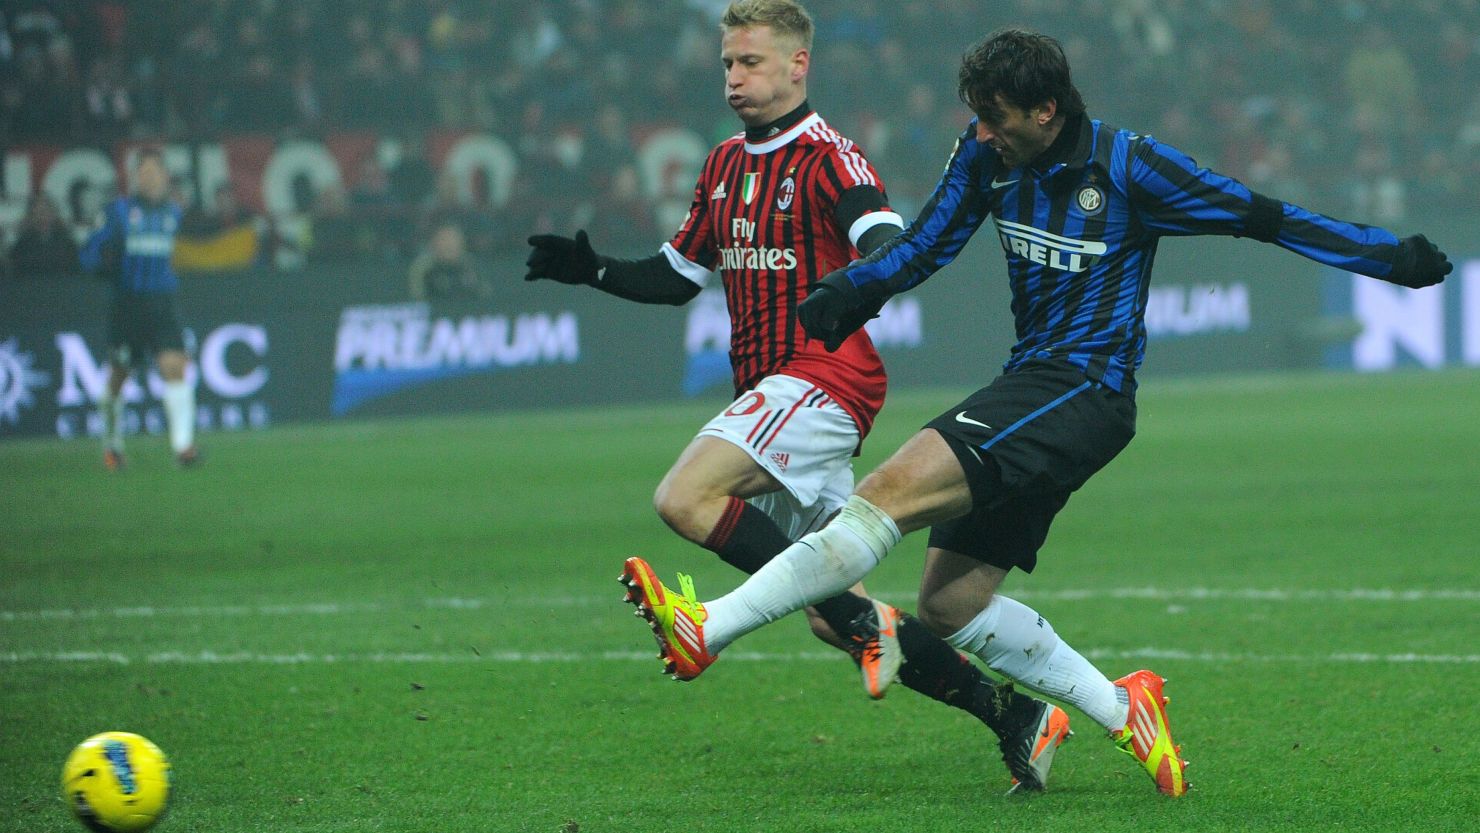 Diego Milito scores the only goal as Inter win the Milan derby 1-0 to throw the Italian Serie A title race wide open.